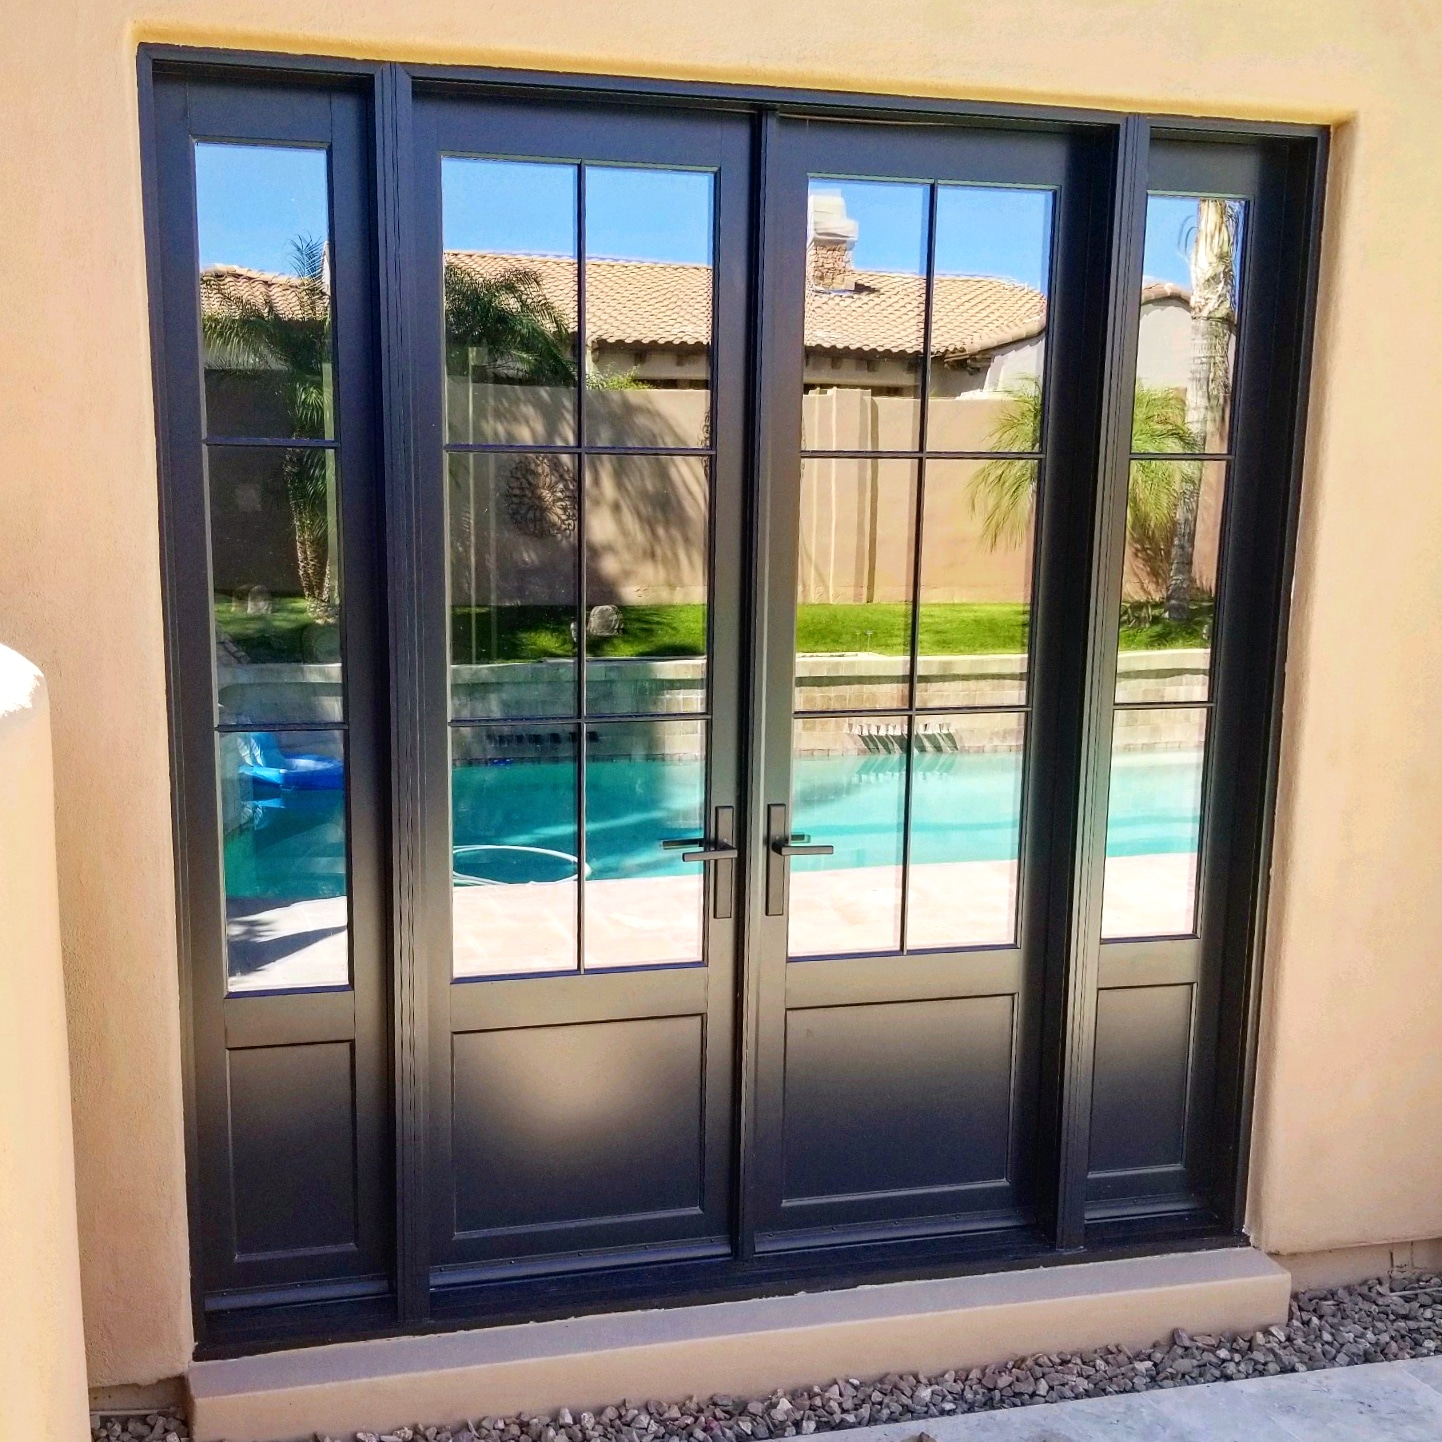 Arizona Window and Door in Scottsdale and Tucson showing black french doors for patio